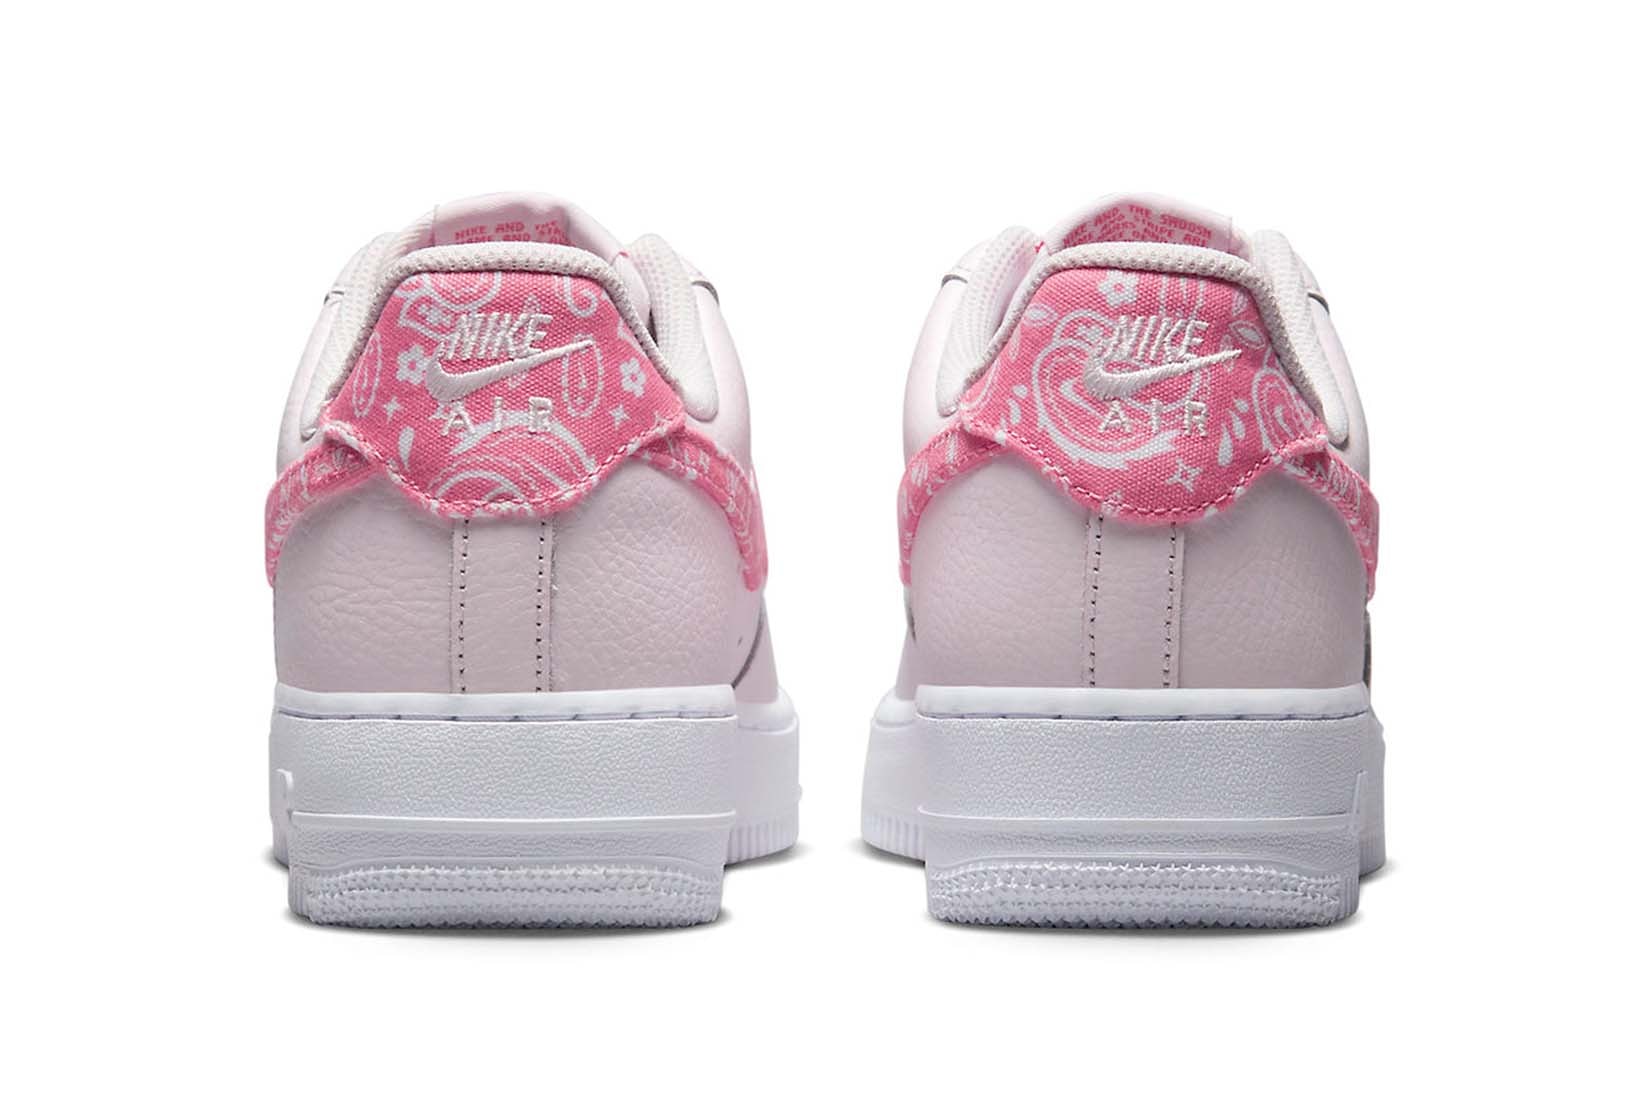 First Look: Nike Air Force 1 Low Pink Paisley